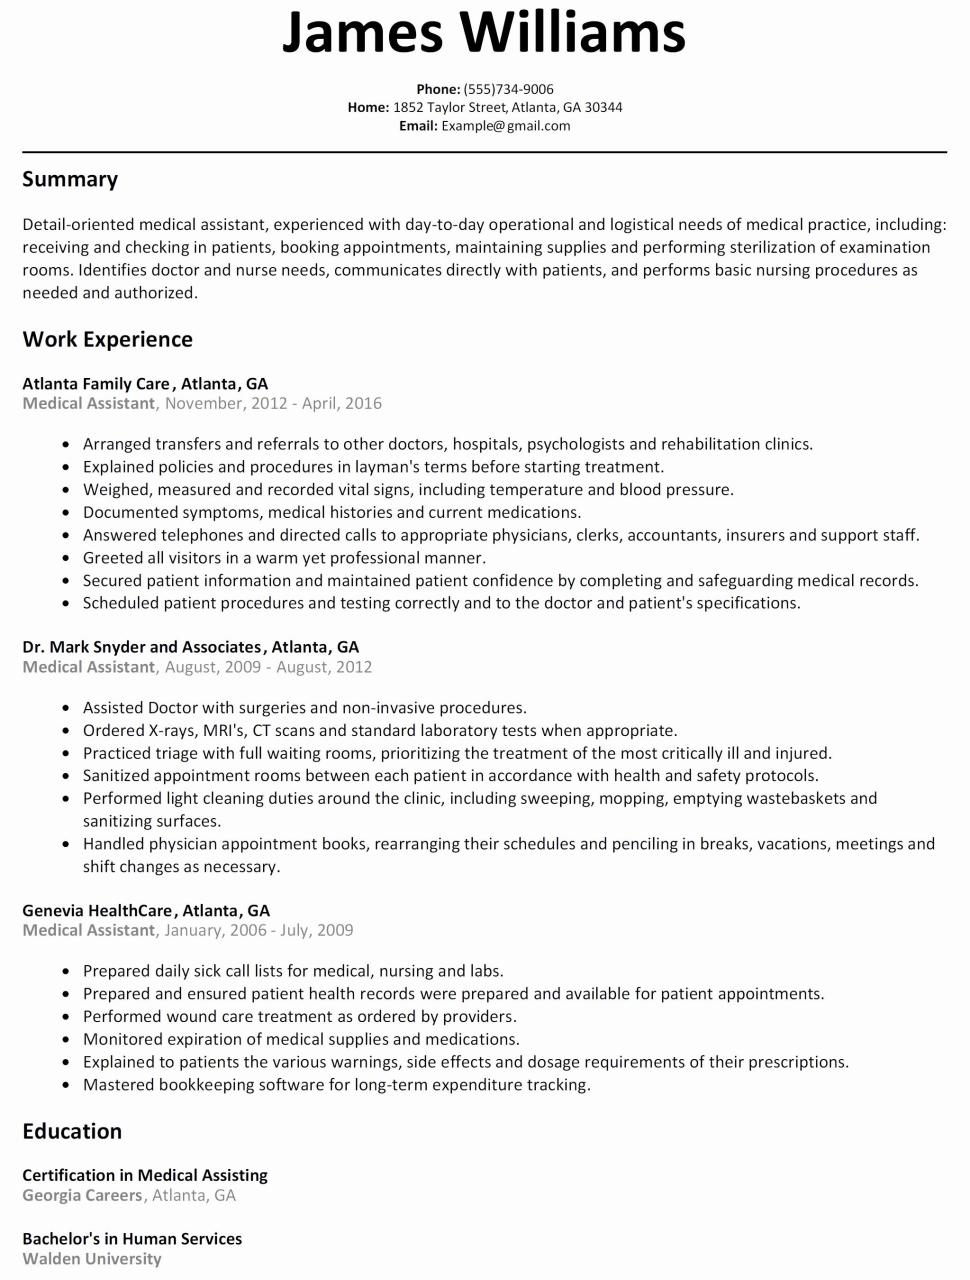 11 Freelance Writer Resume Template Collection Resume Ideas